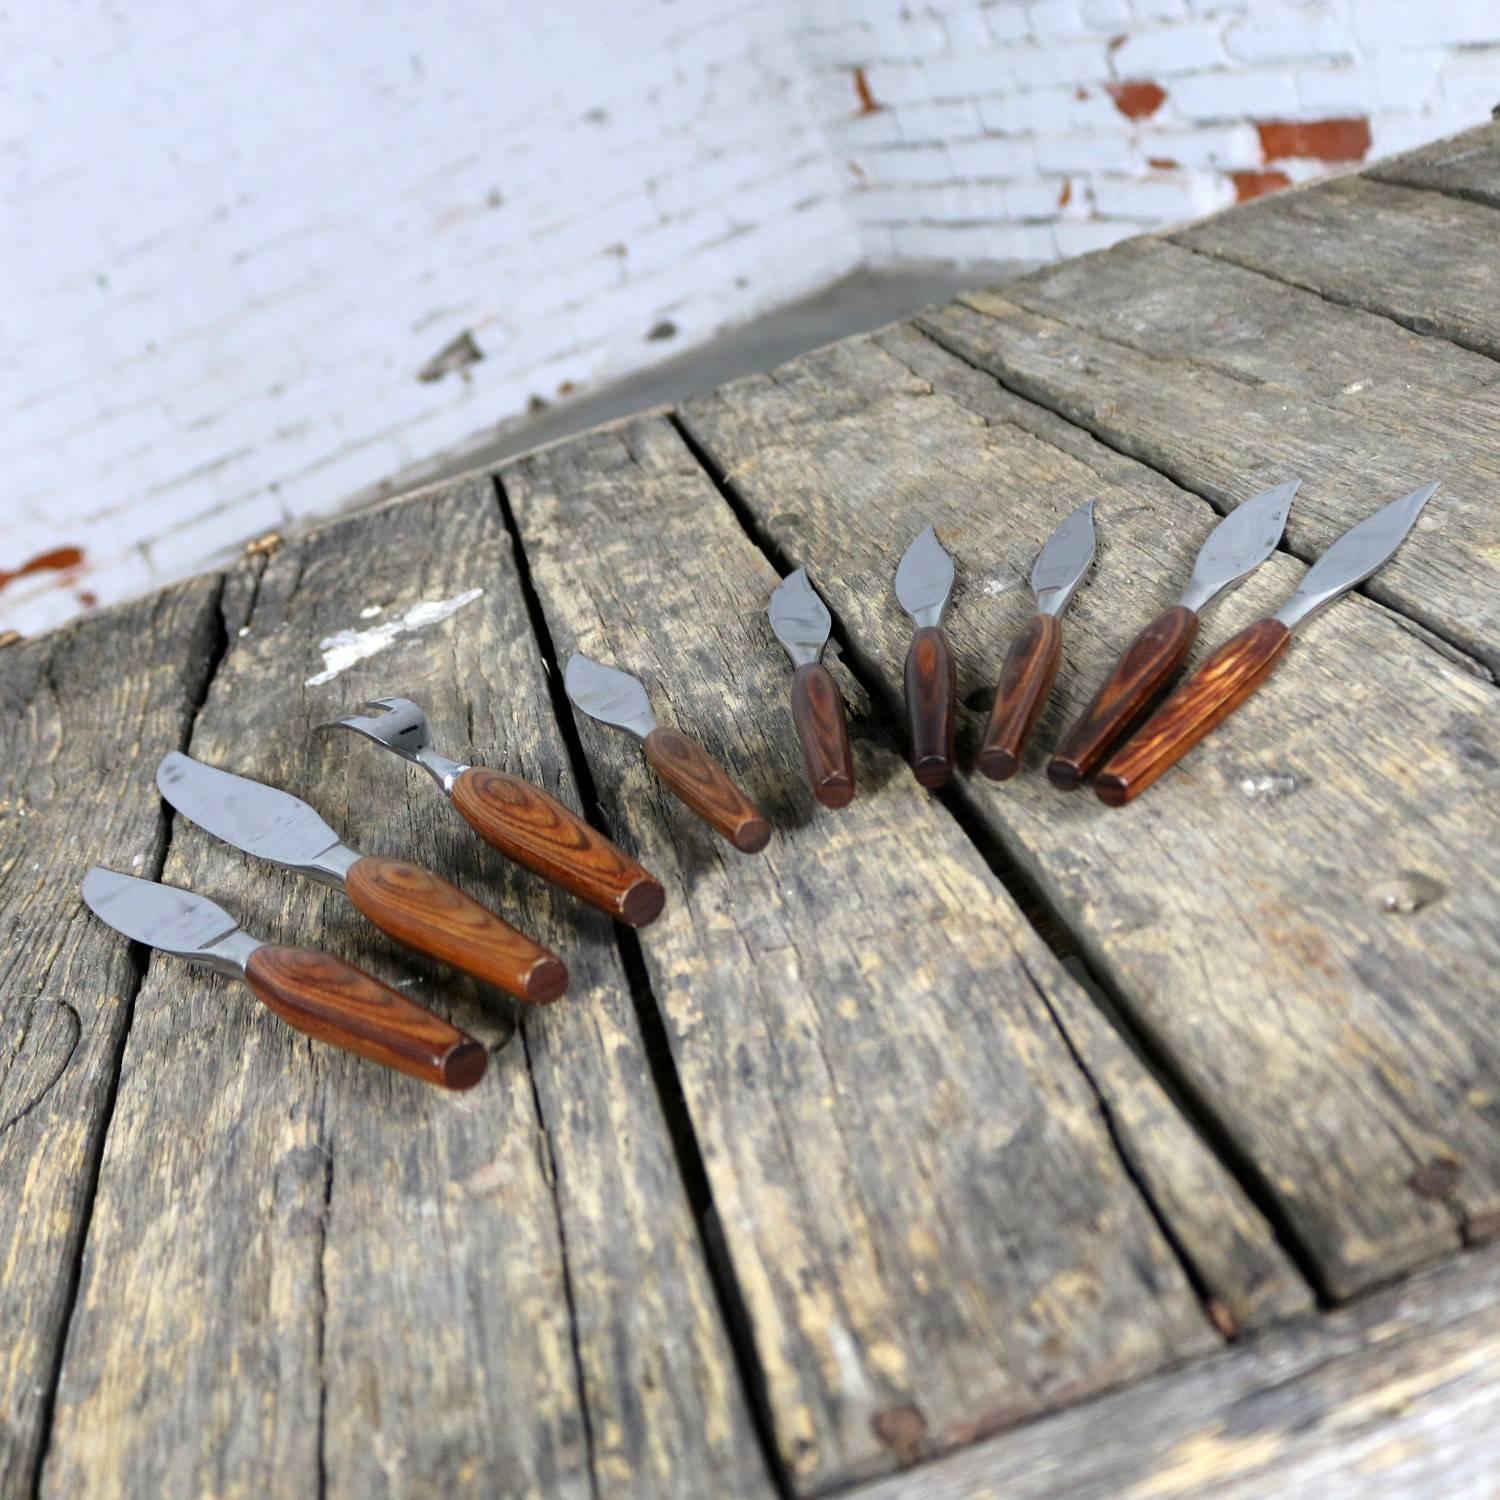 20th Century Regent Sheffield Cutlery Teak and Stainless Mode Danish Steak Knives and Serving